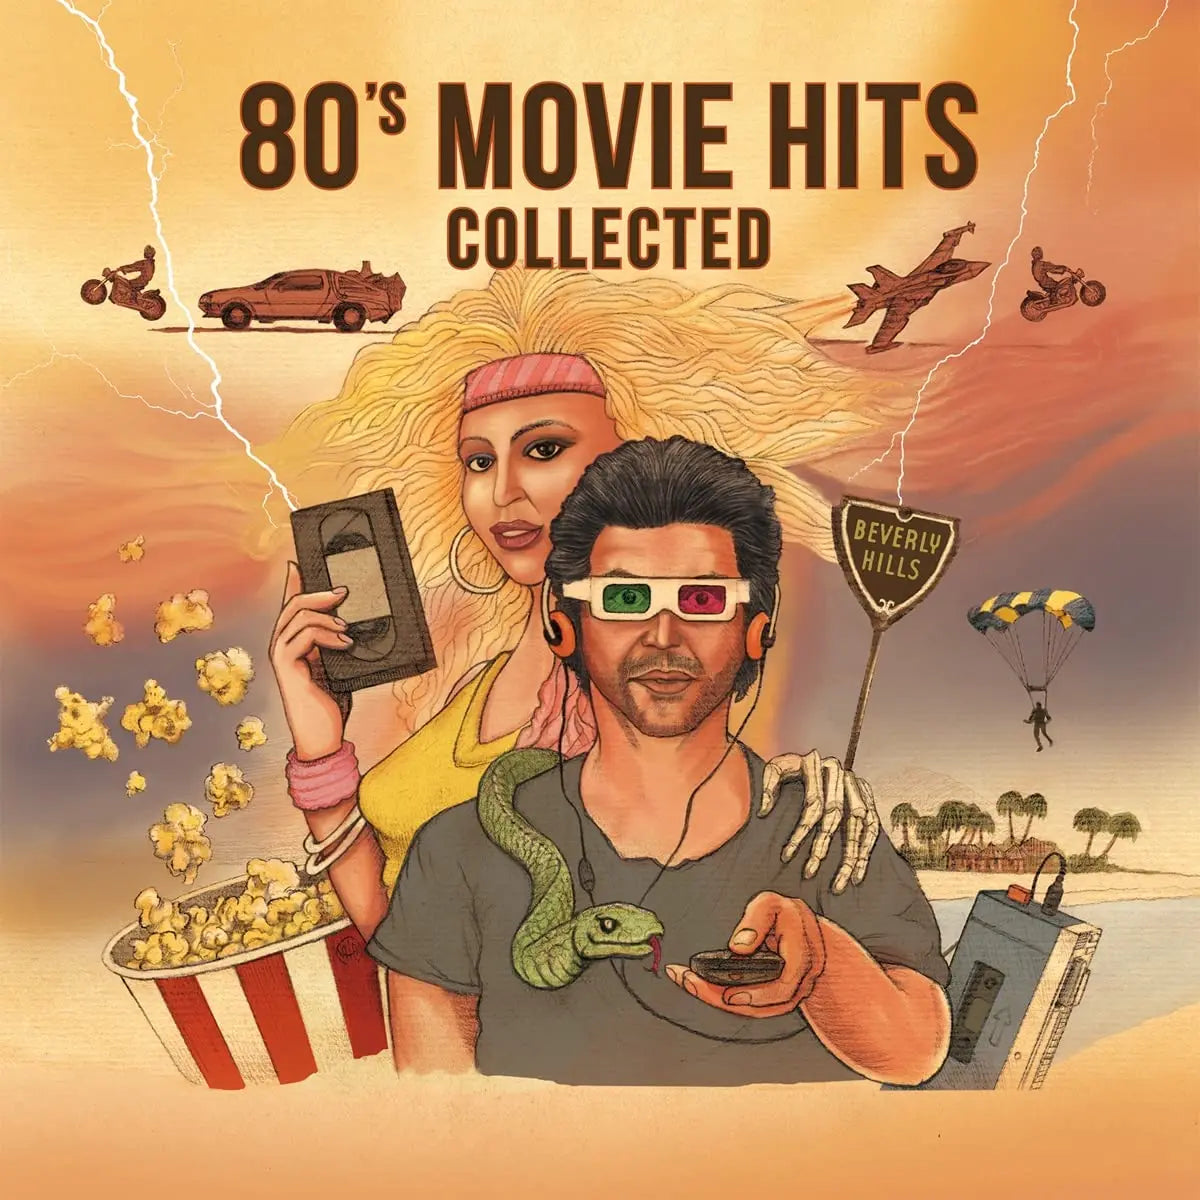 Various - 80's Movie Hits Collected [Limited Black & White Color Vinyl]